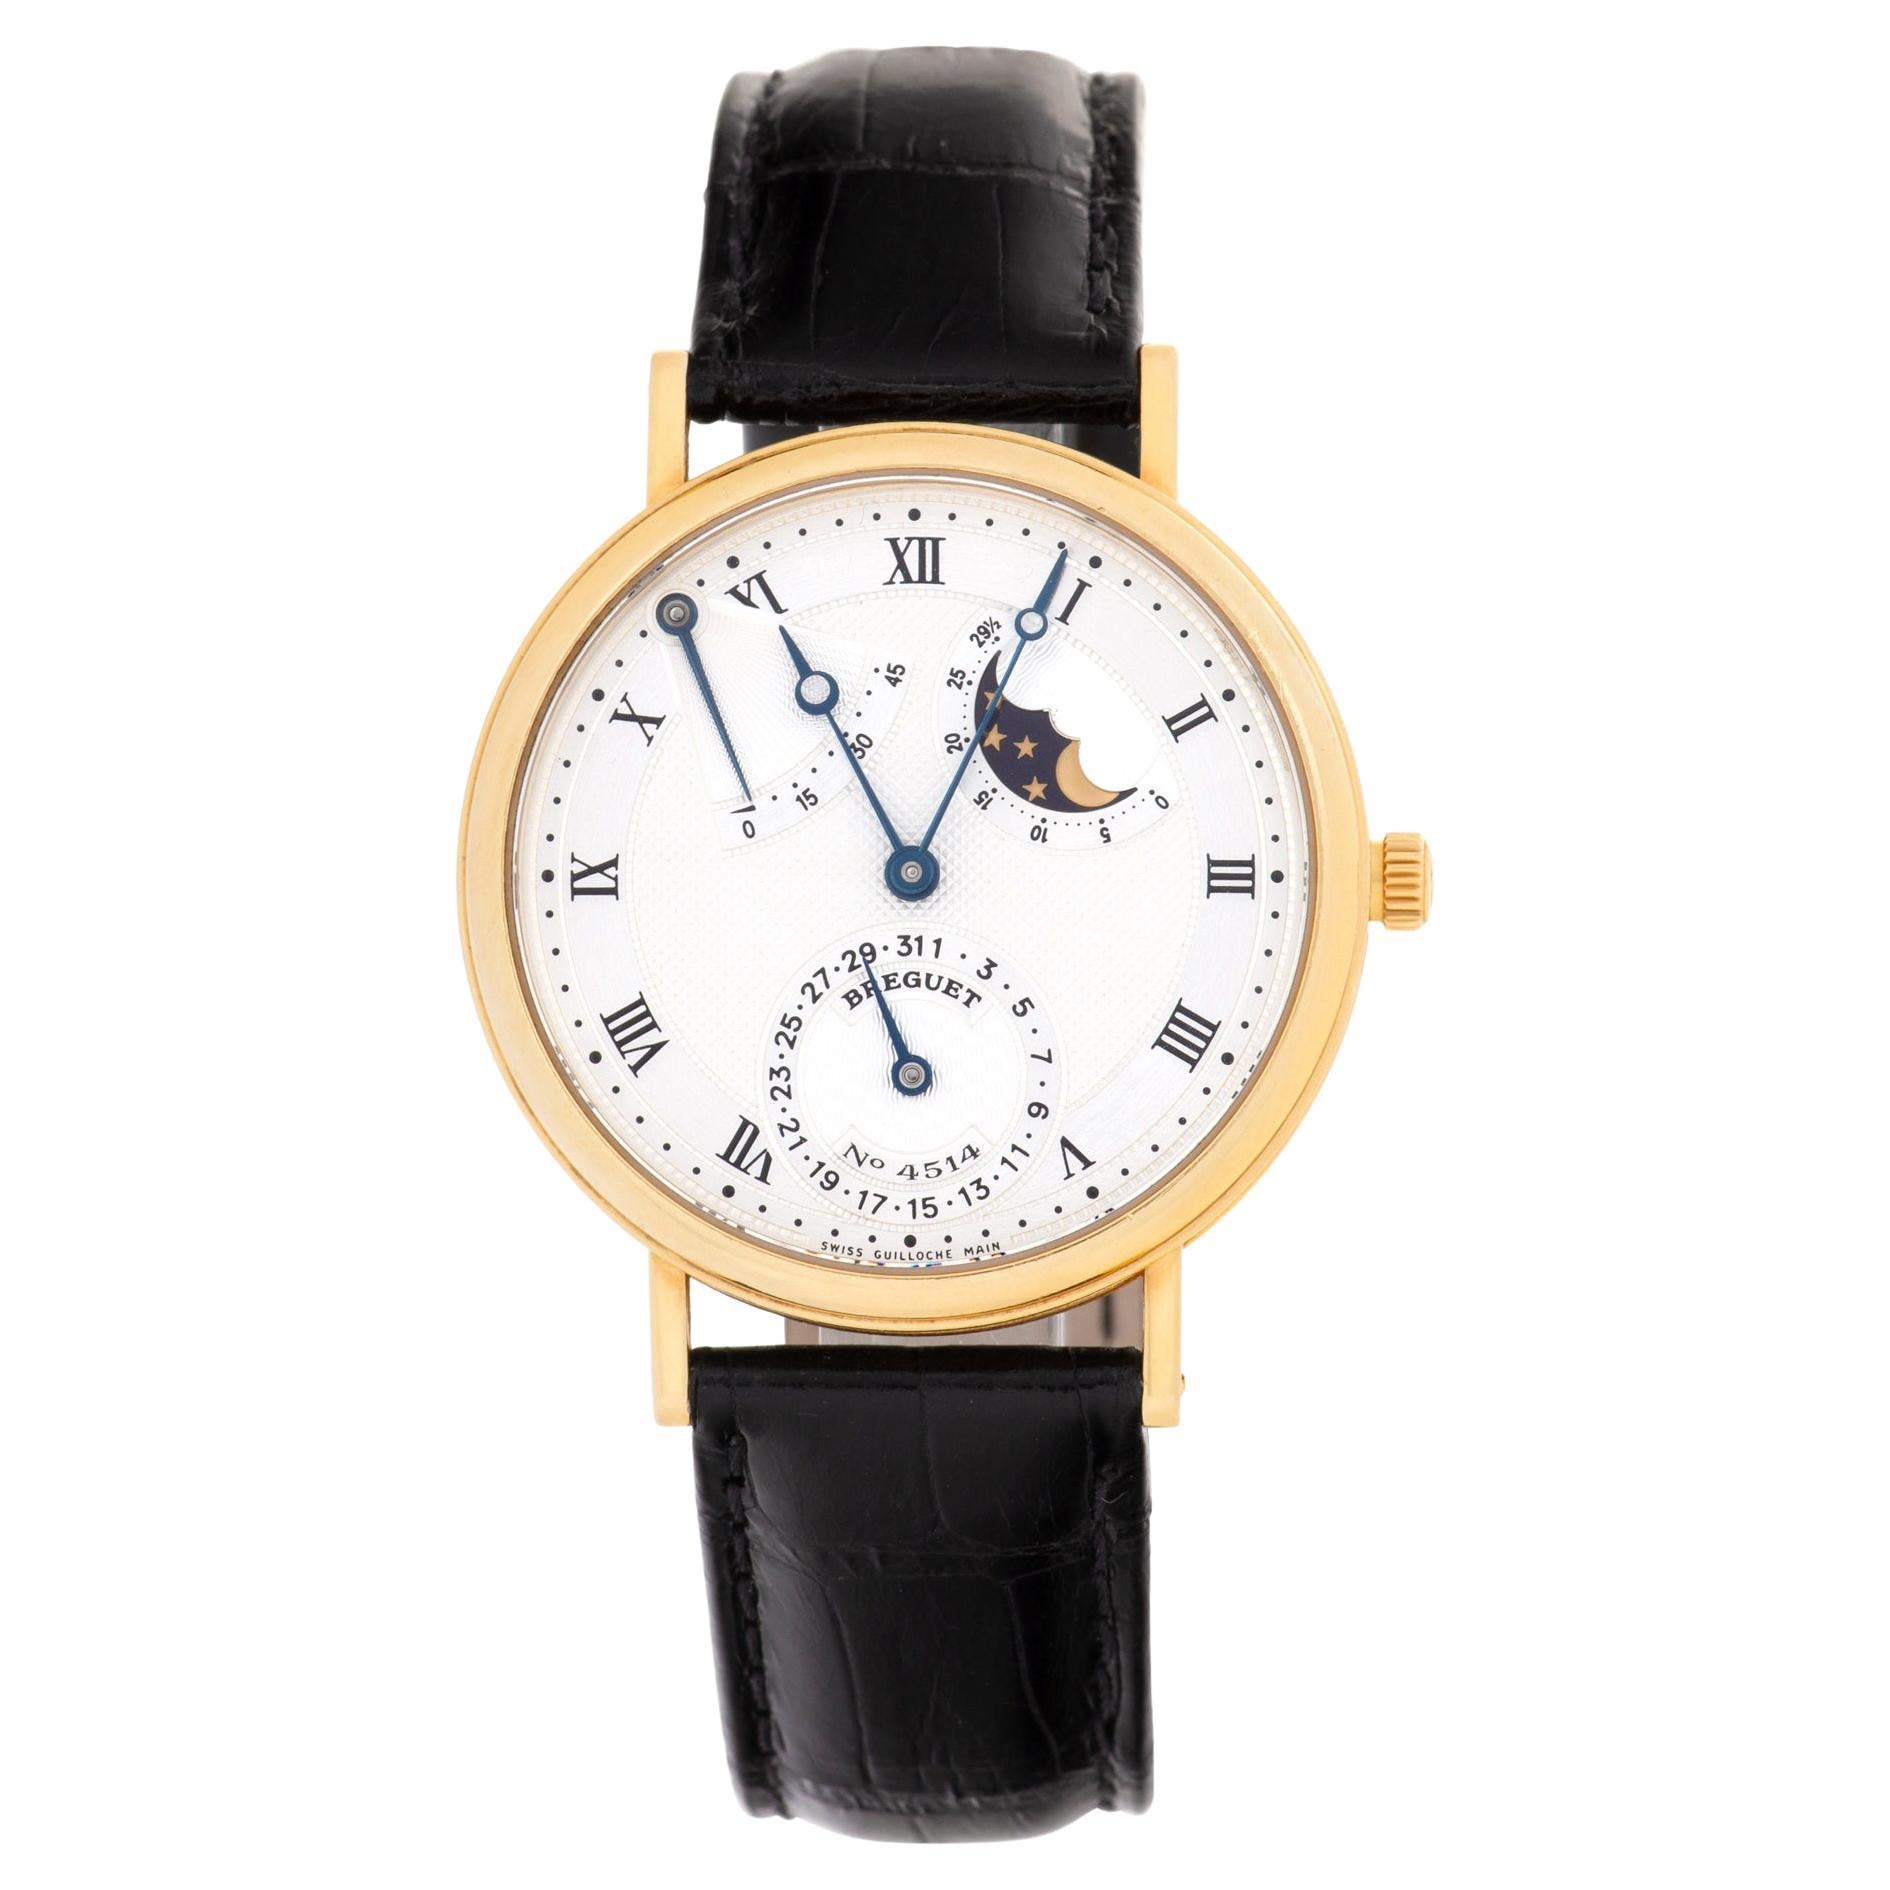 Breguet Classique in 18k Yellow Gold Watch on Black Leather Strap For Sale